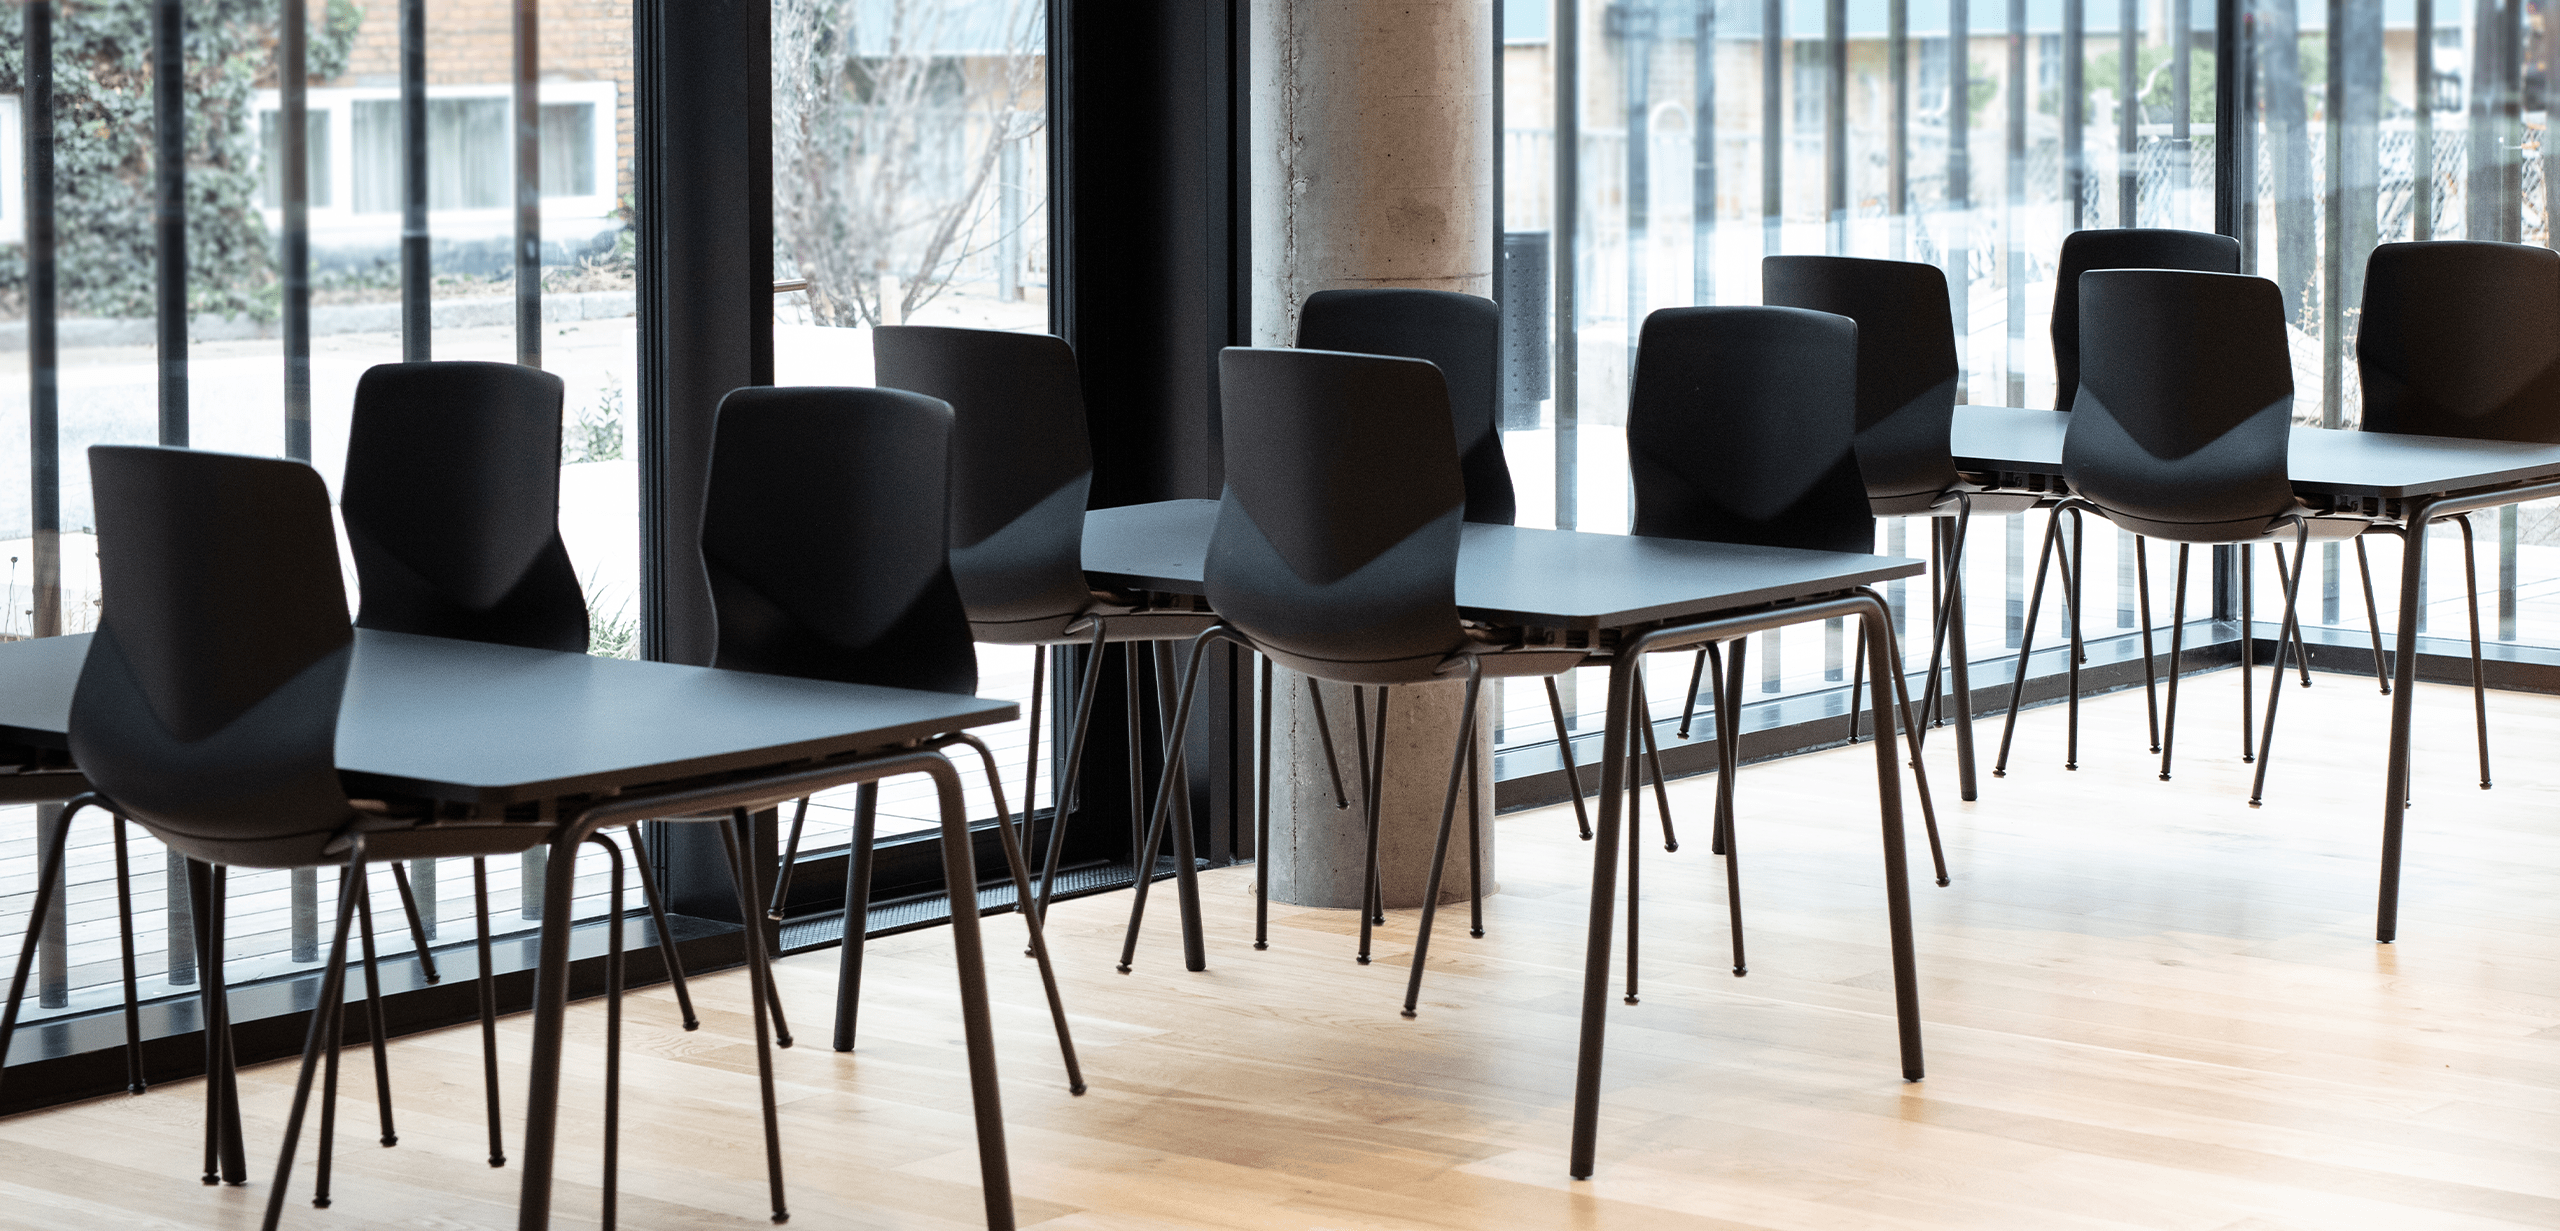 A row of black chairs and tables in a room.